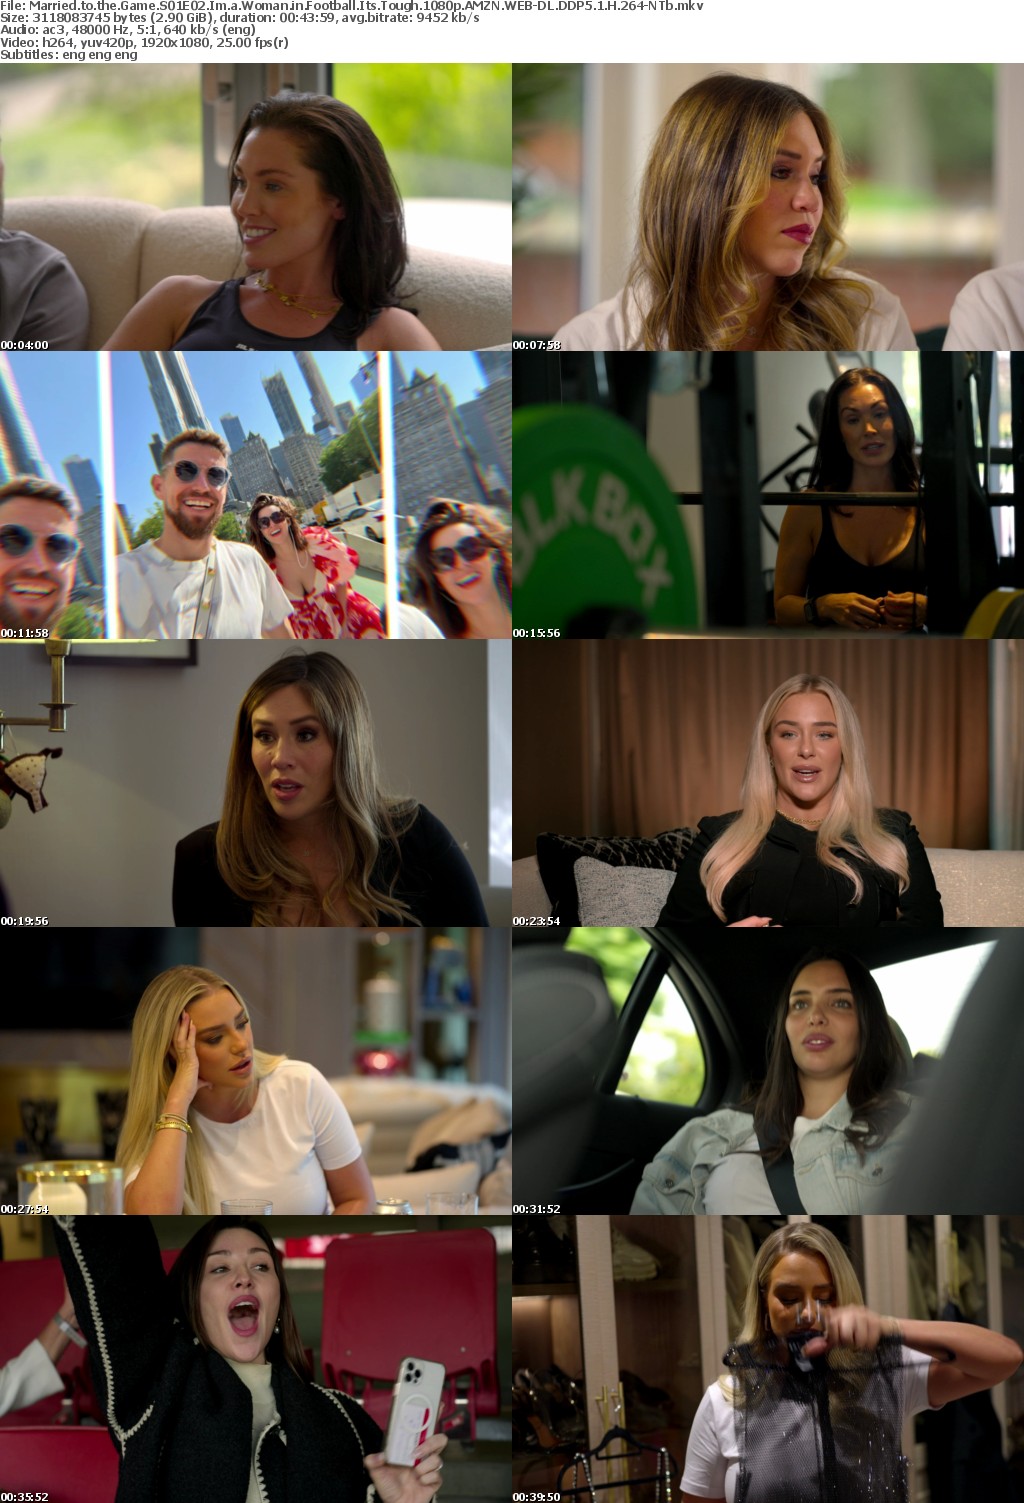 Married to the Game S01E02 Im a Woman in Football Its Tough 1080p AMZN WEB-DL DDP5 1 H 264-NTb